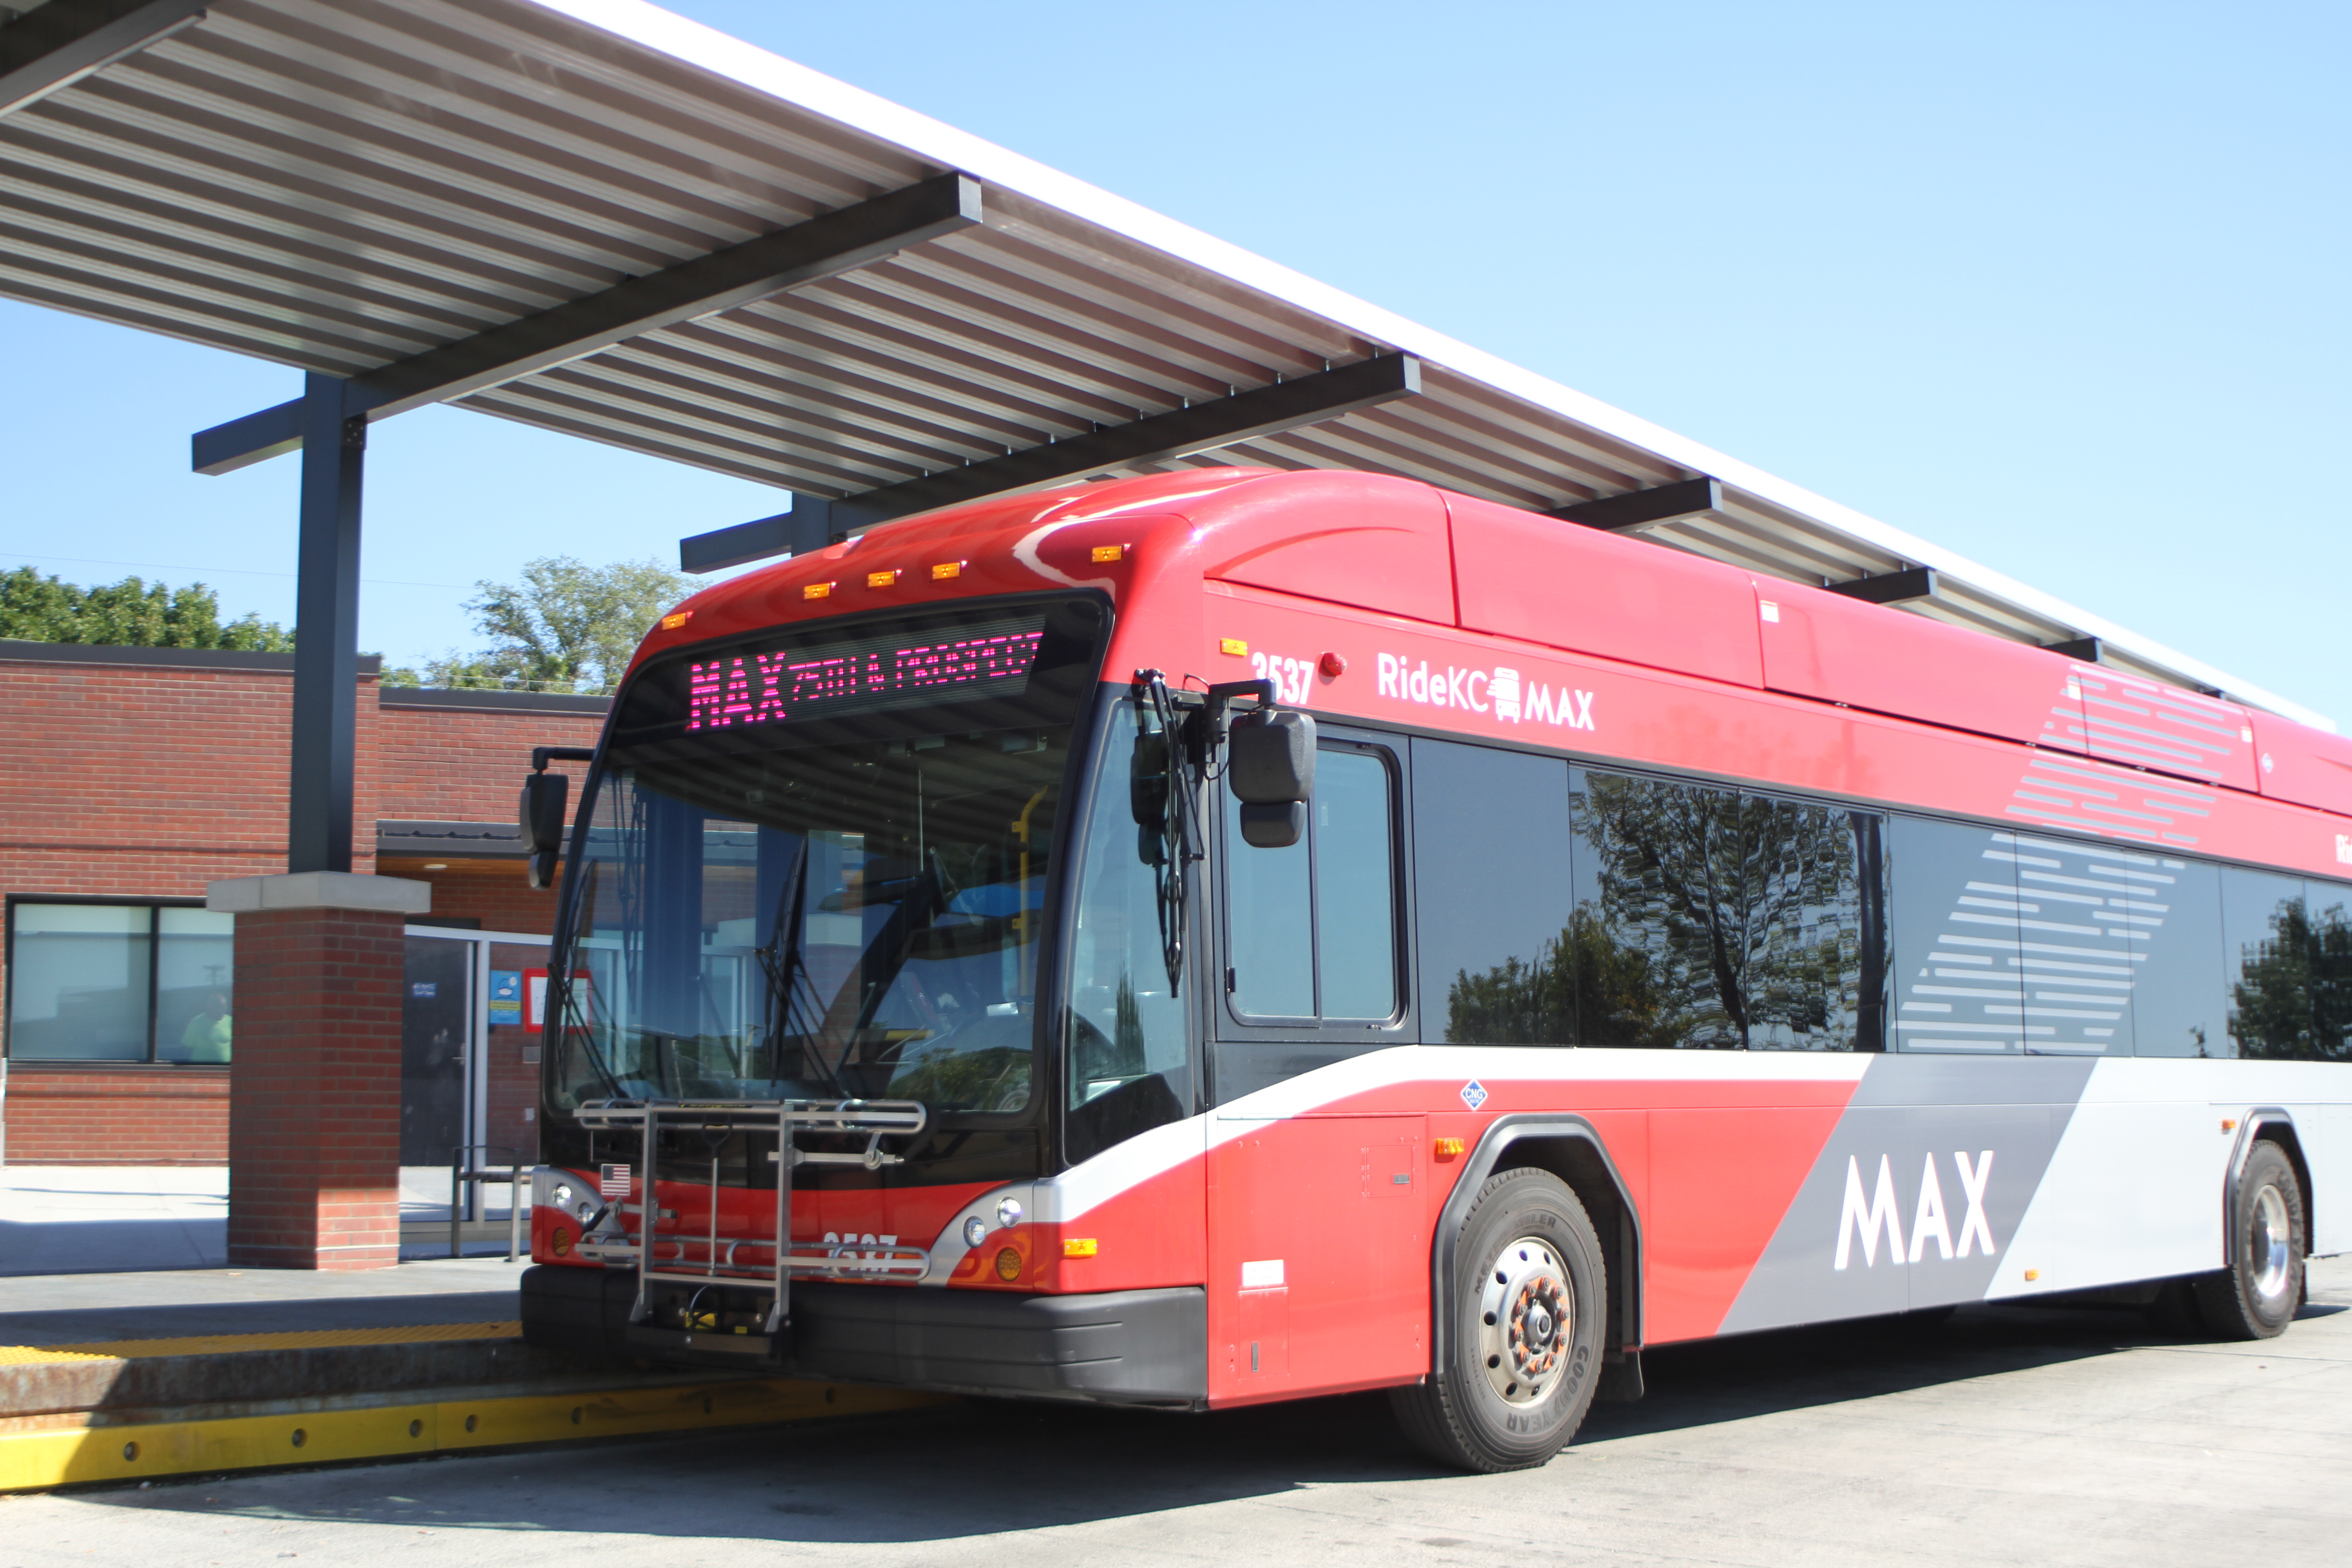 Prospect MAX bus at Alphapointe in south Kansas City